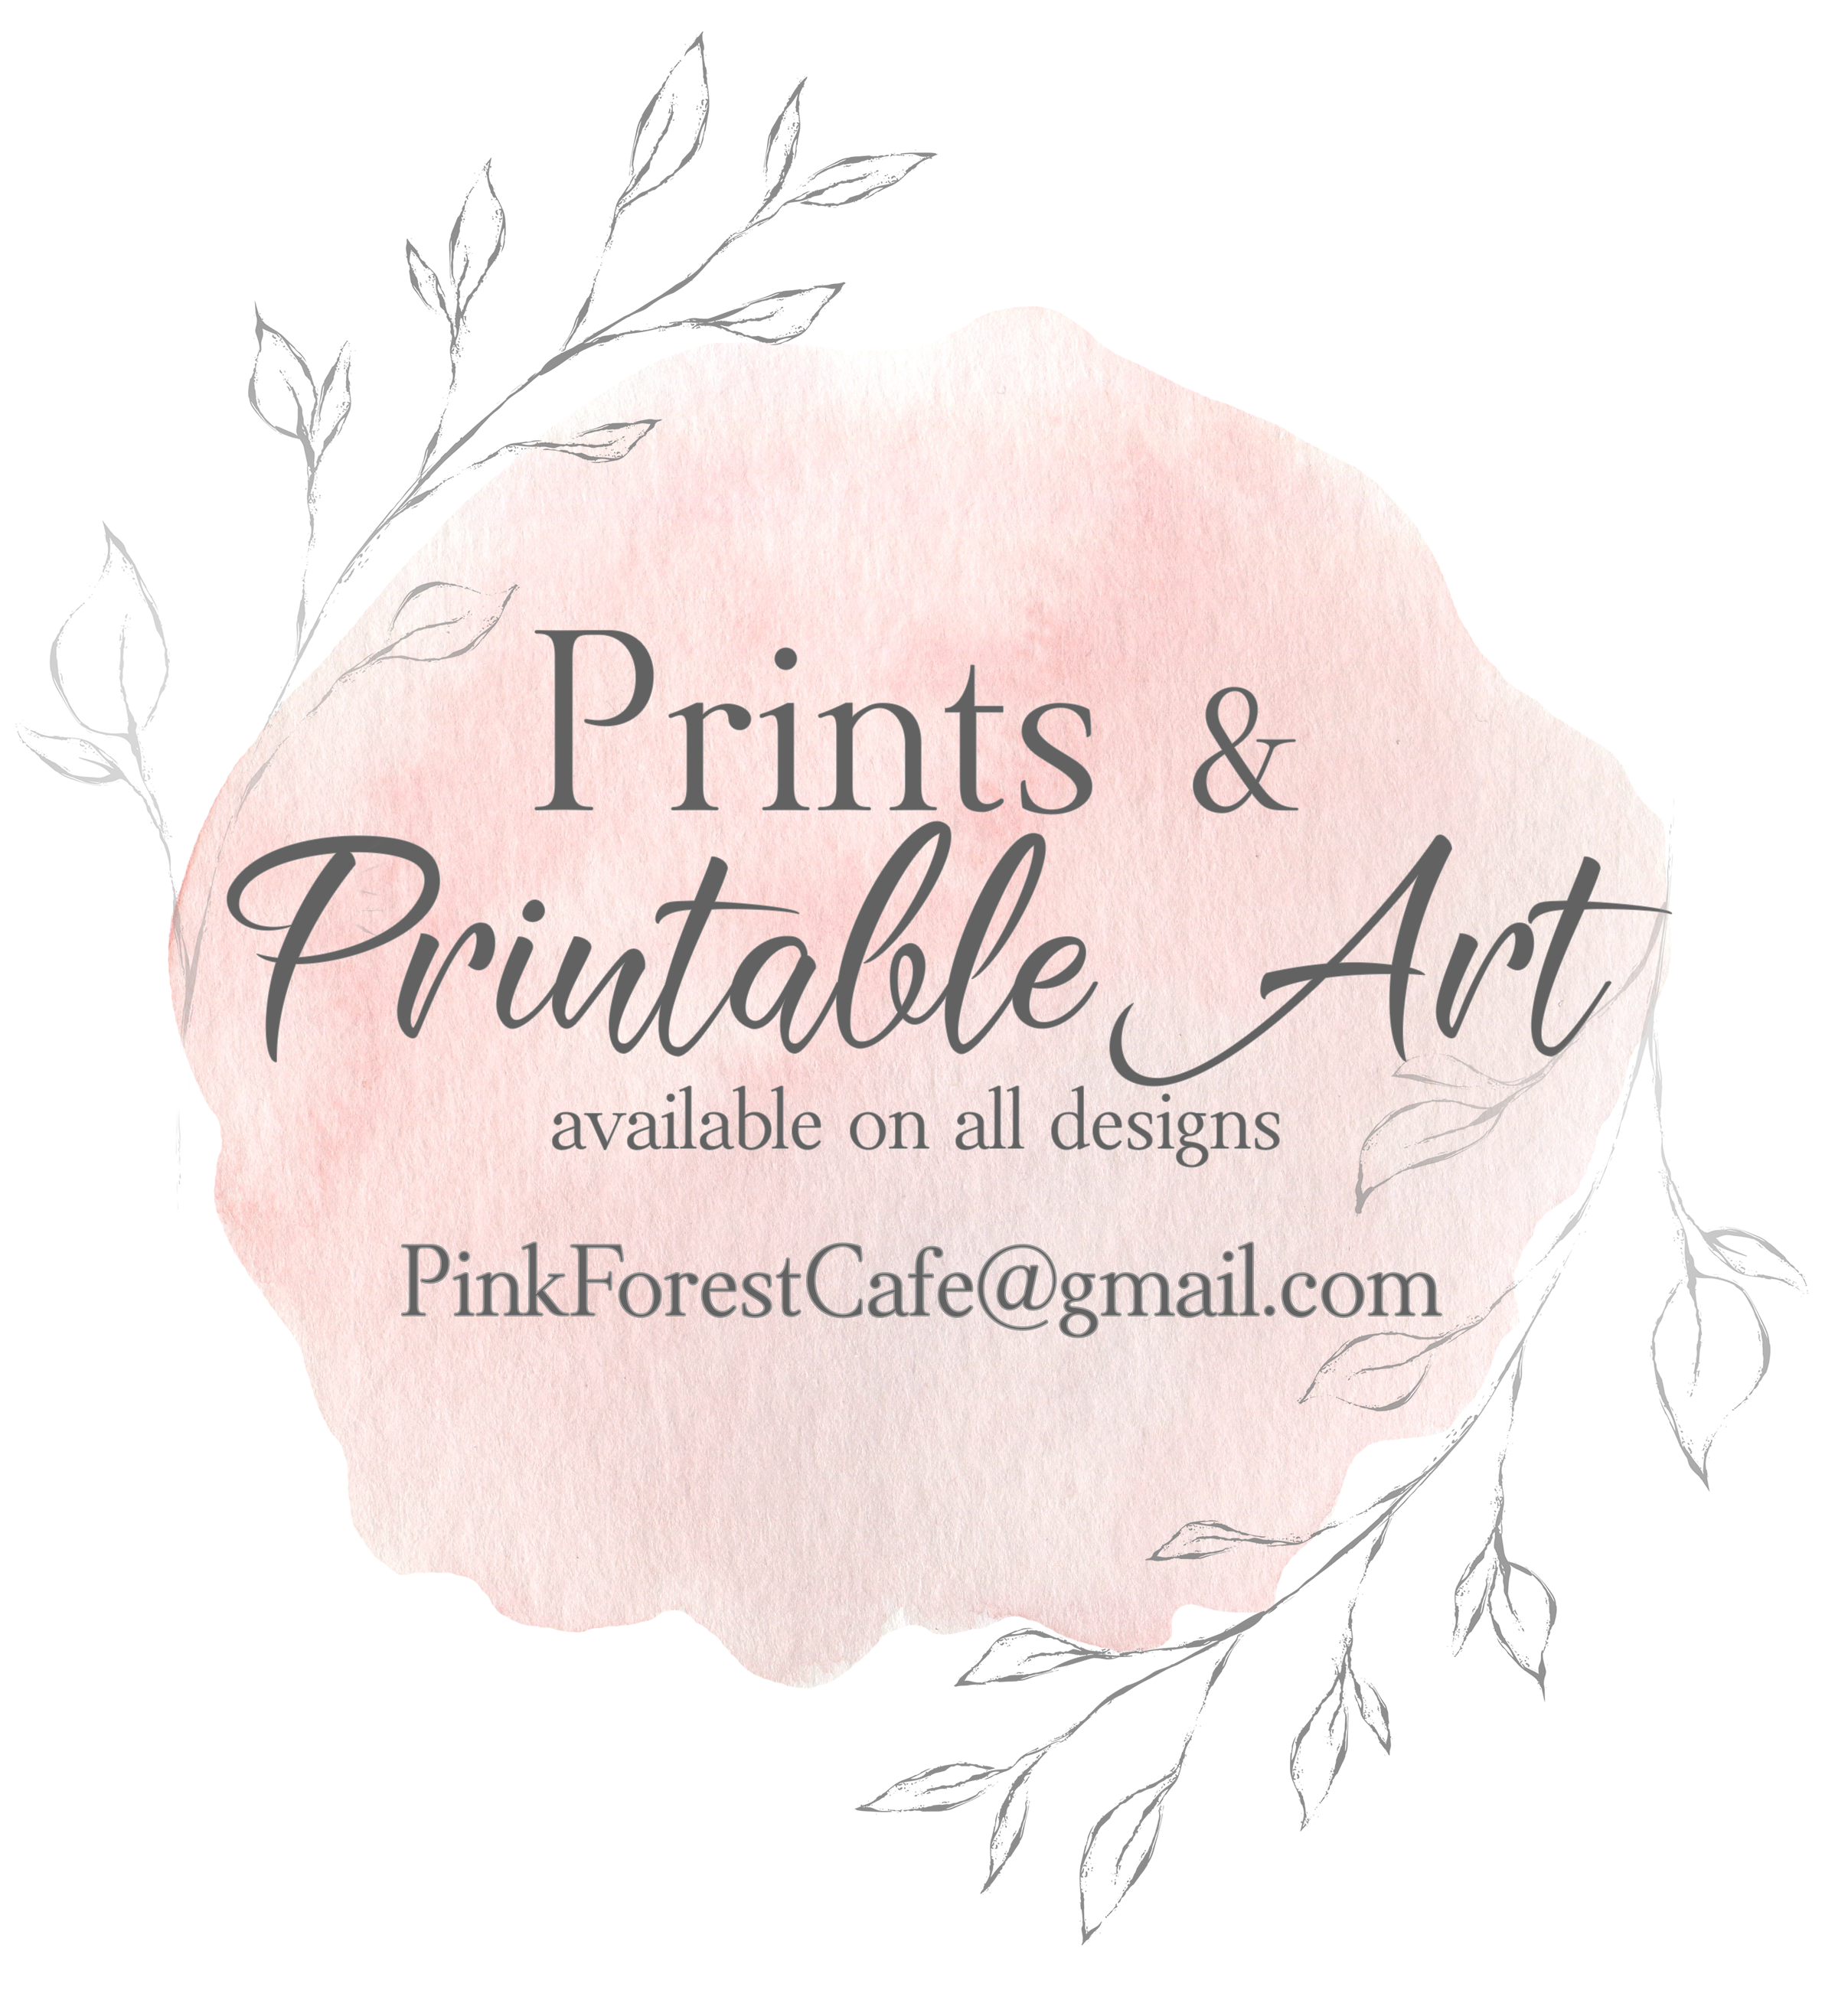 Order My Print - Pink Forest Cafe - 2 (Two) Prints - 2 Designs Printed and Shipped